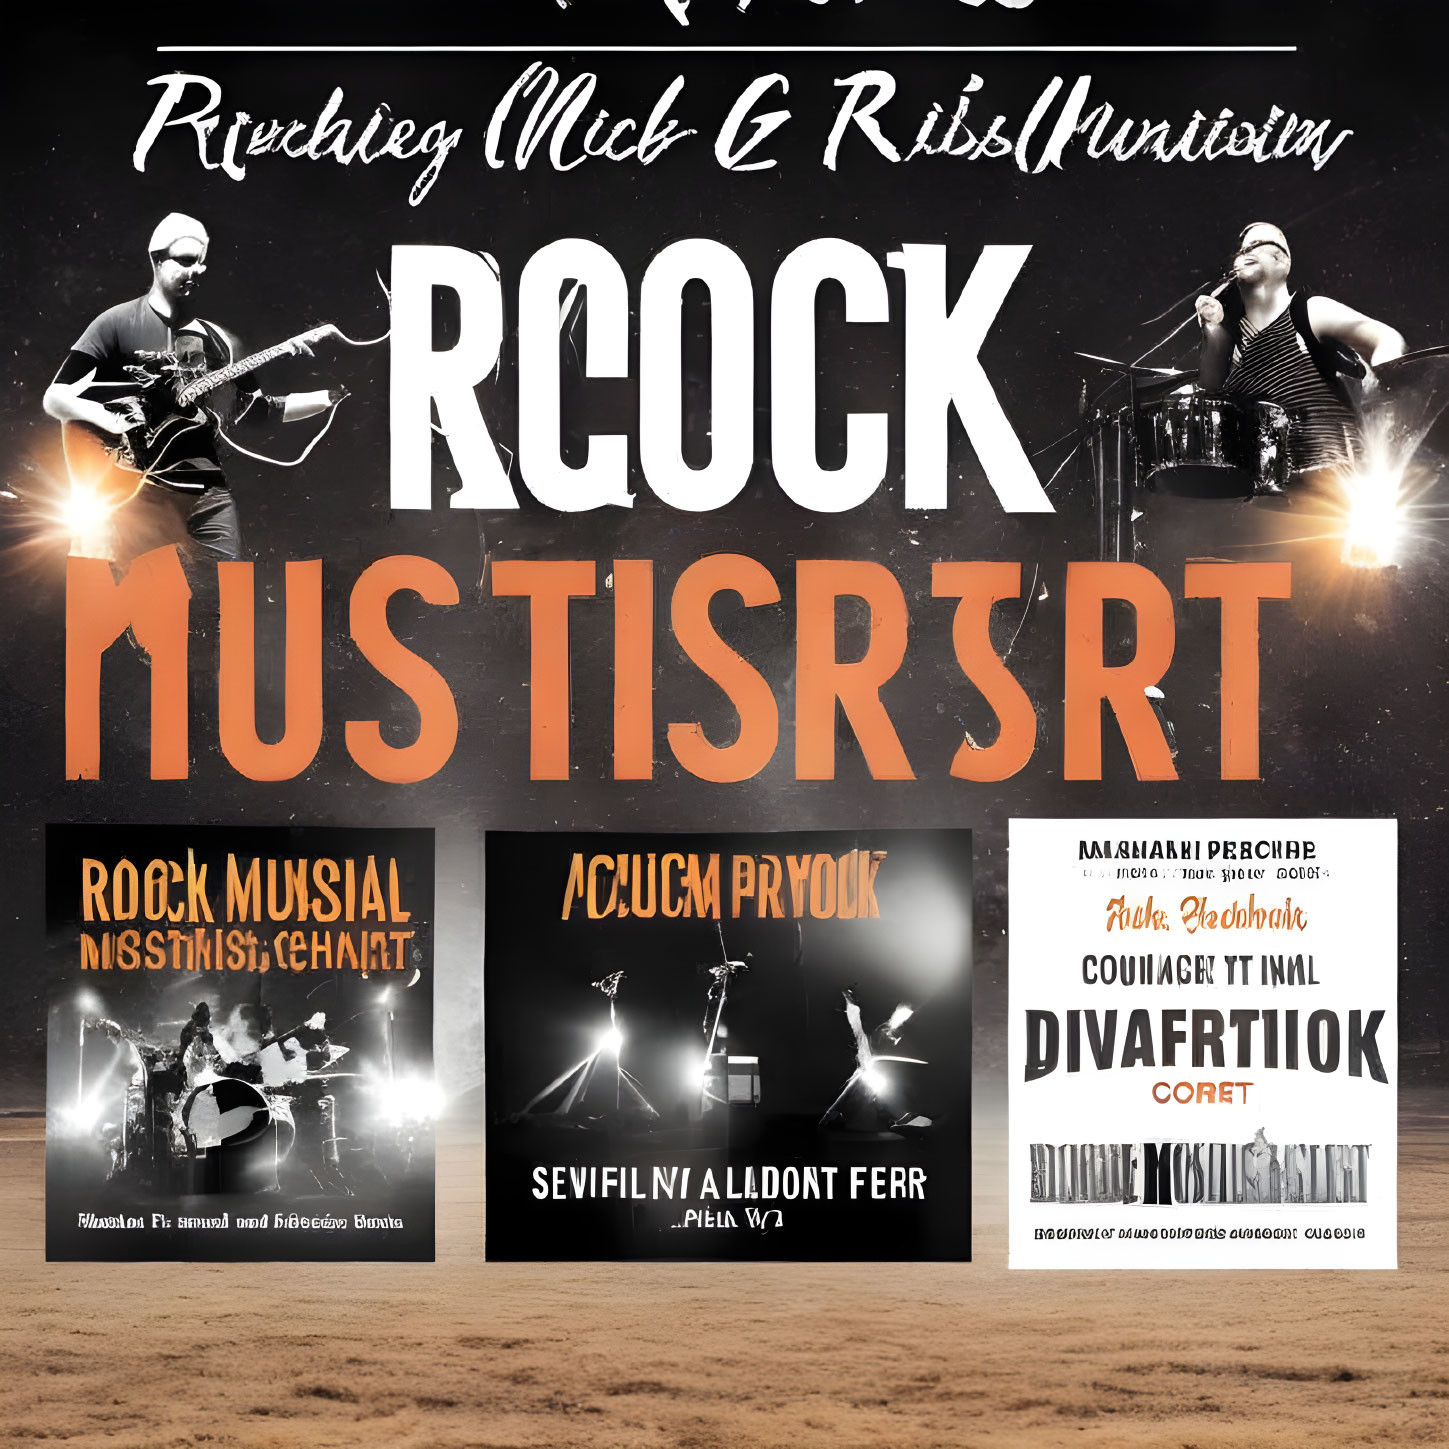 Musical Poster Featuring Dominant "ROCK" Word and Guitarist Images